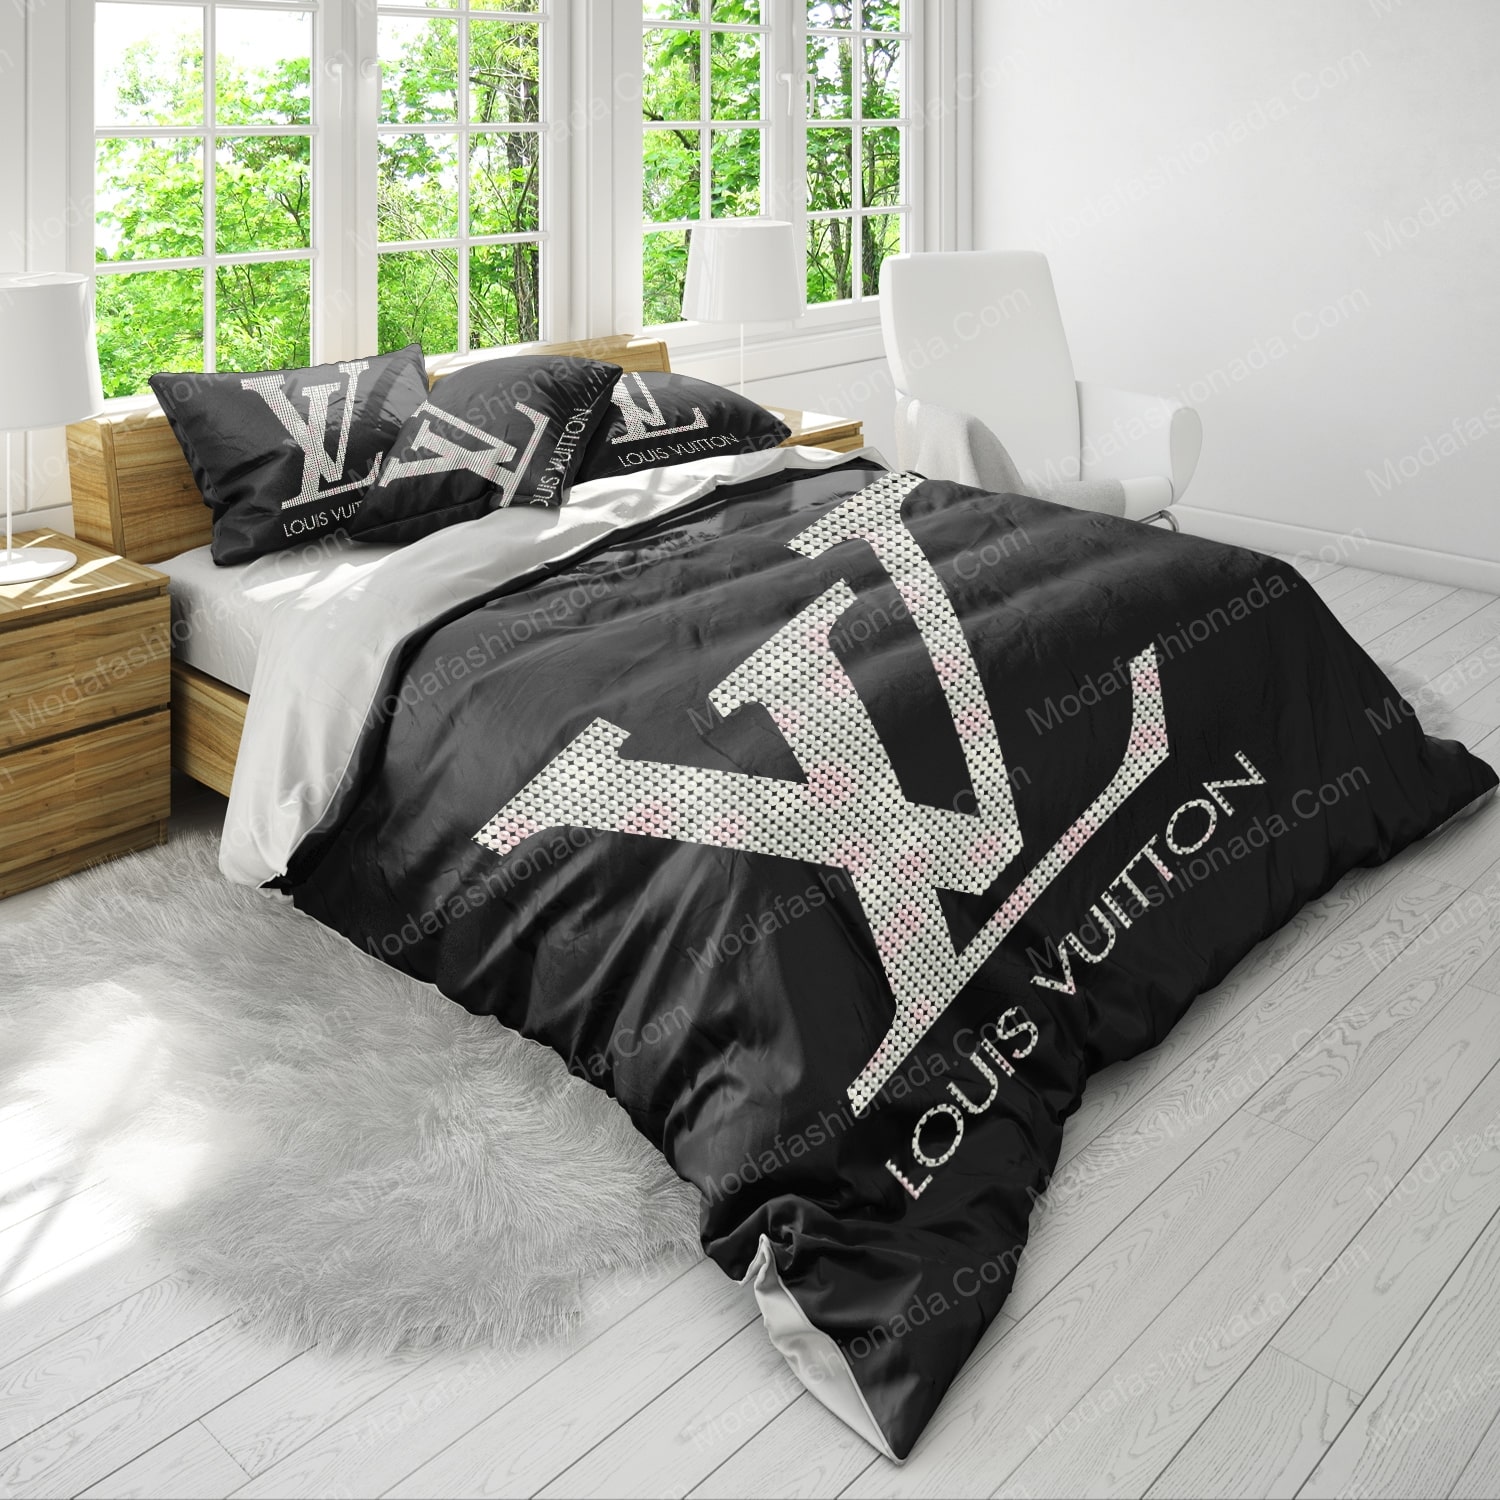 louis vuitton bed set – MY luxurious home